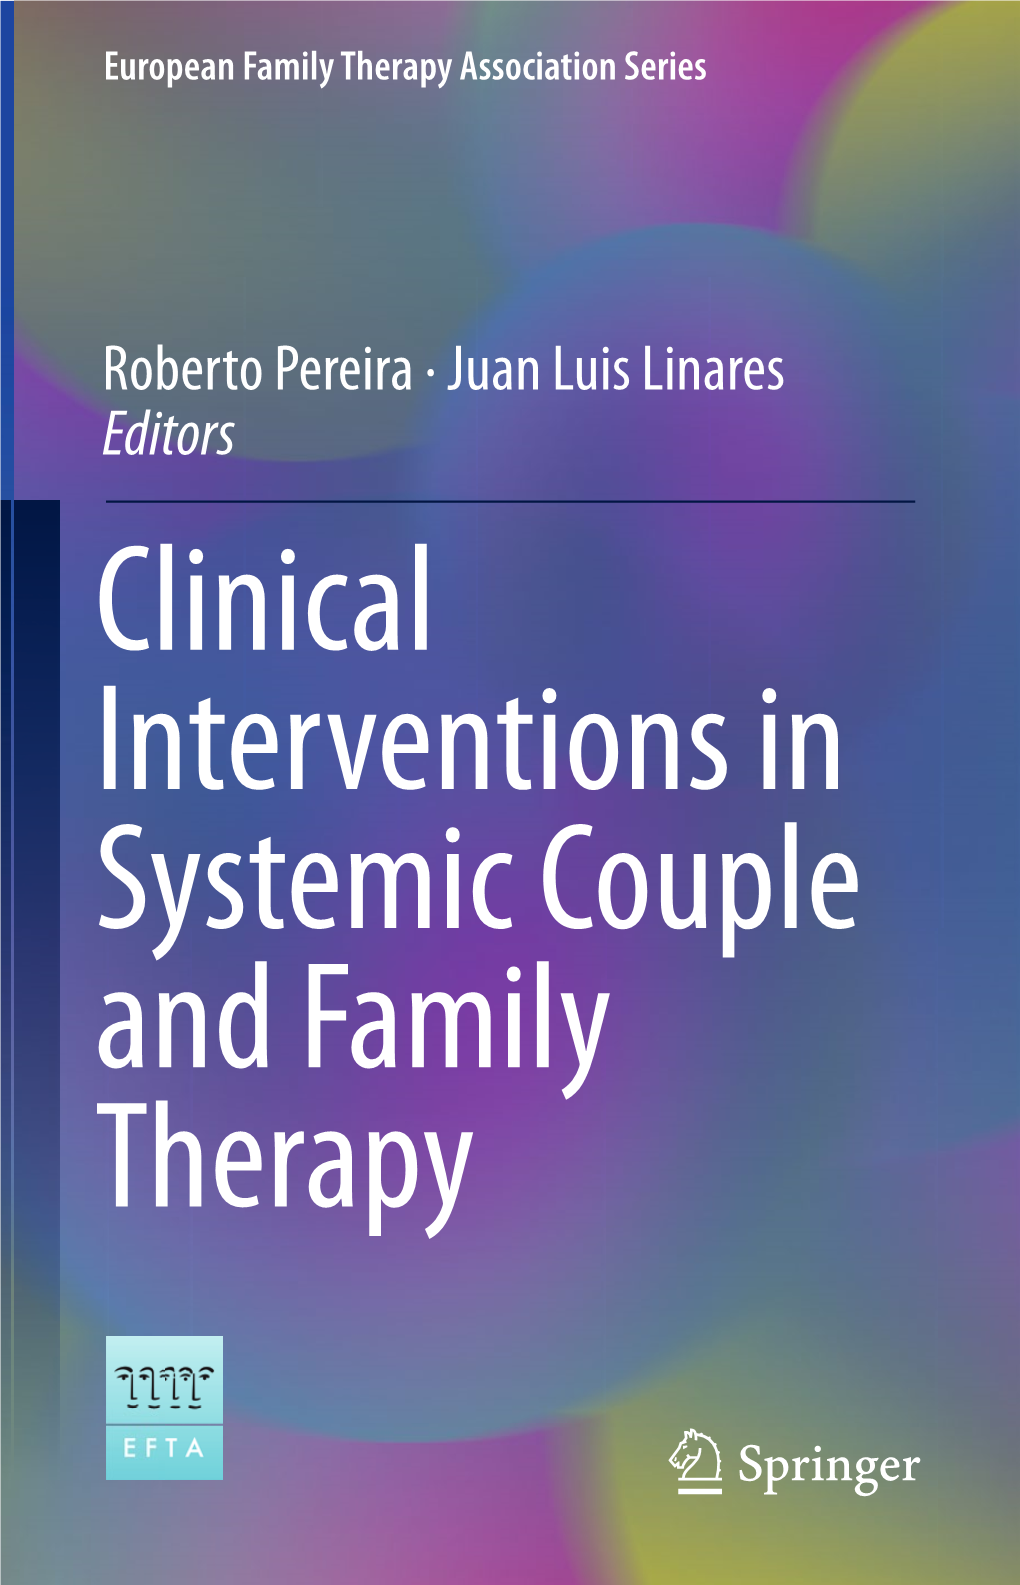 Clinical Interventions in Systemic Couple and Family Therapy European Family Therapy Association Series